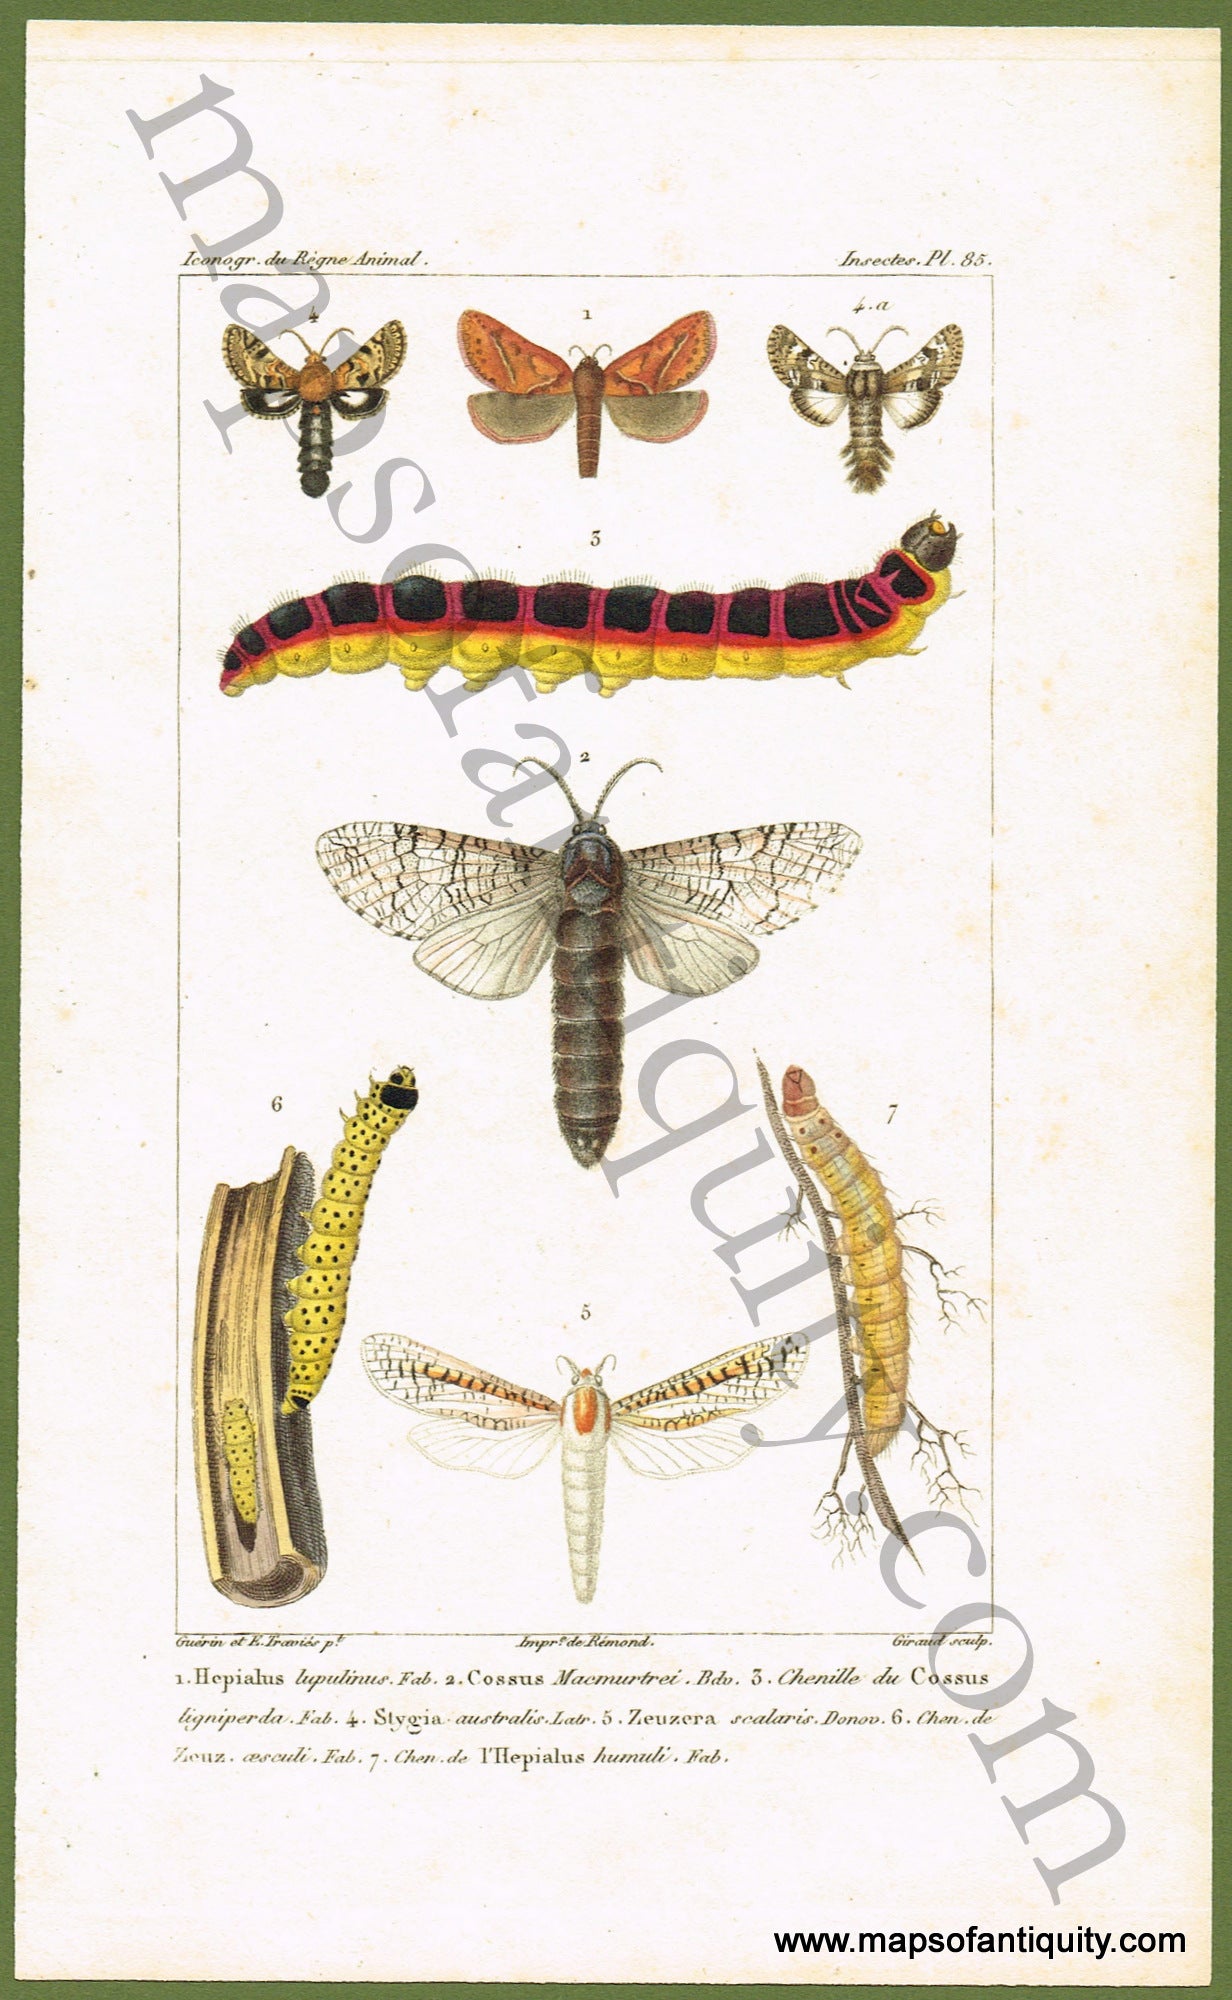 Antique-Hand-Colored-Engraved-Illustration-Moths-and-Caterpillars-Natural-History-Prints-Insects-c.-1829-Guerin-Meneville-Cuvier-Maps-Of-Antiquity